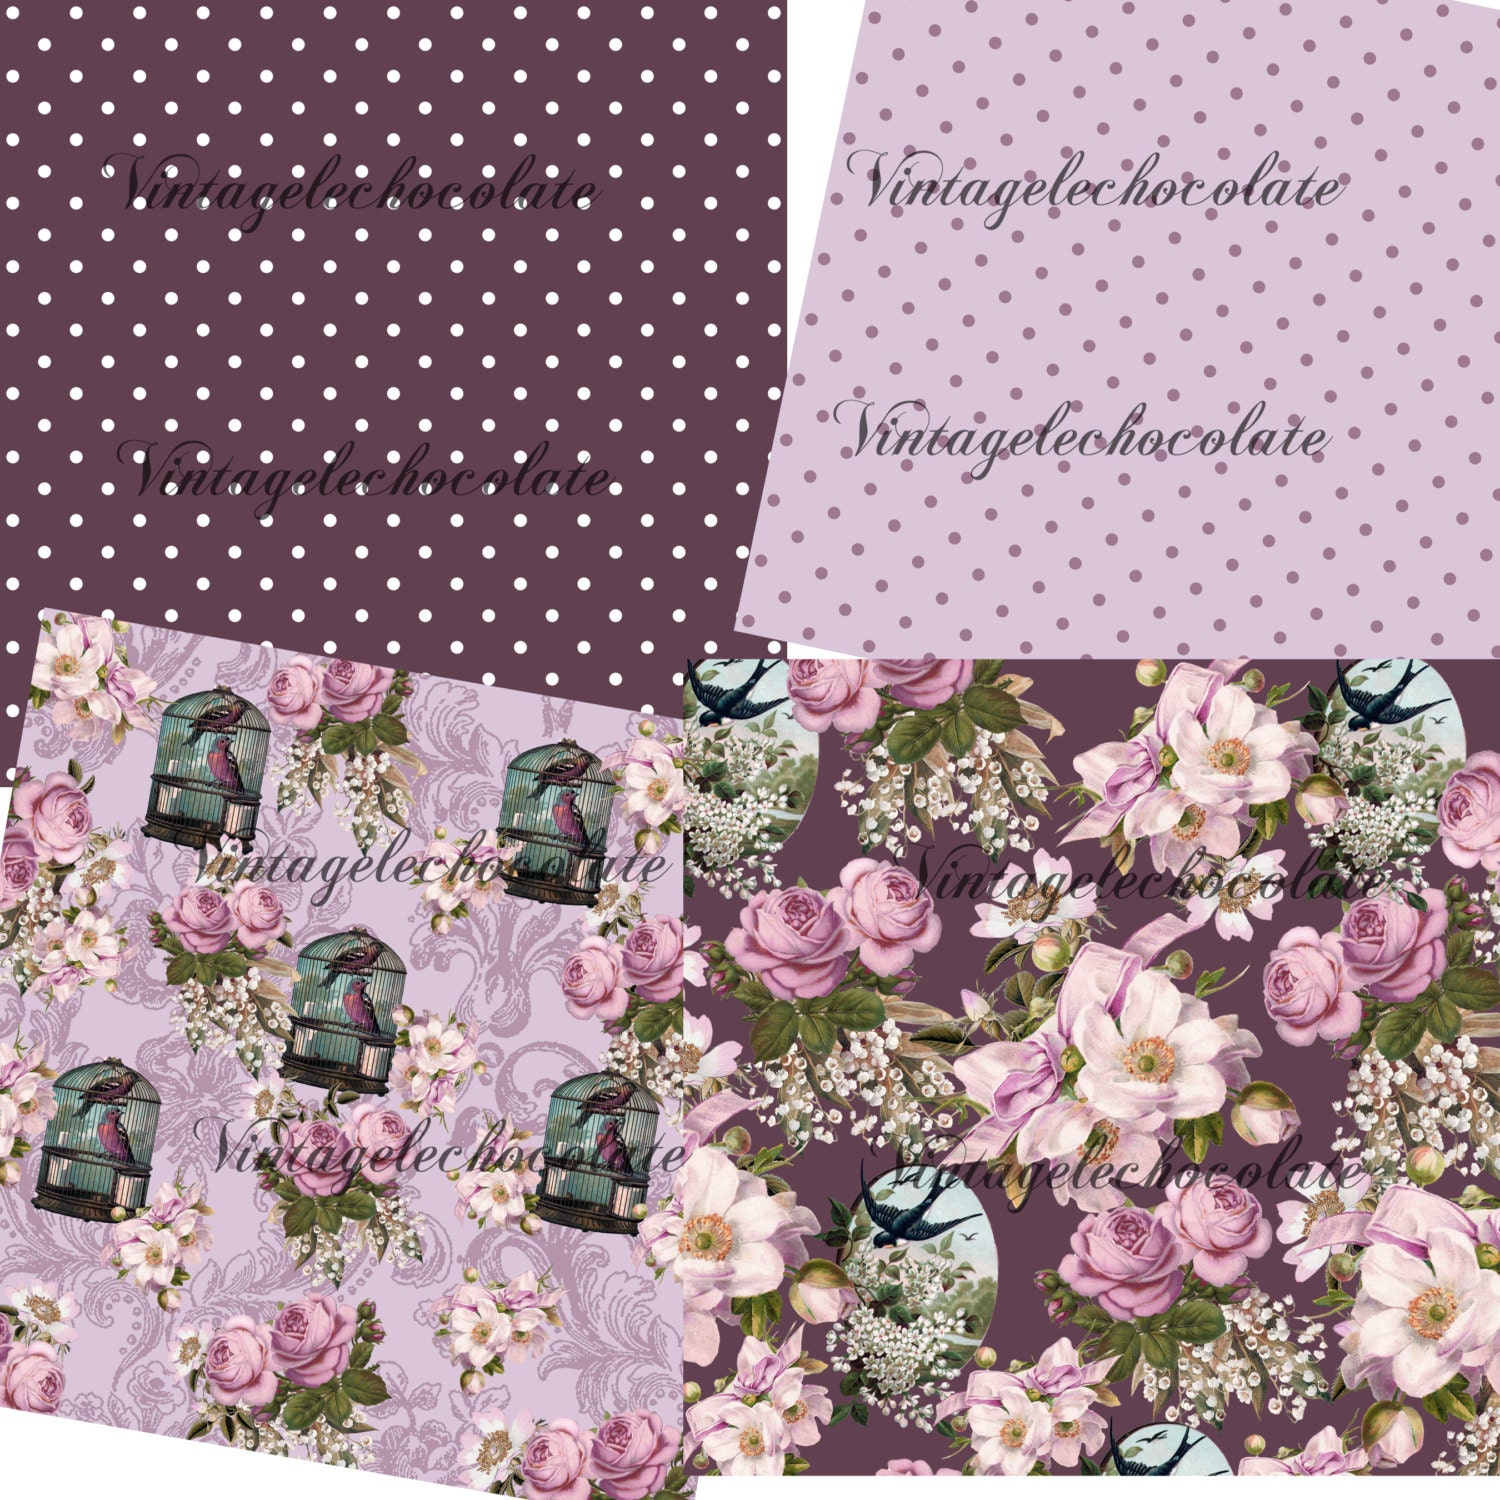 Romantic Milky Way Refreshing Floral Scrapbook Paper - Perfect for